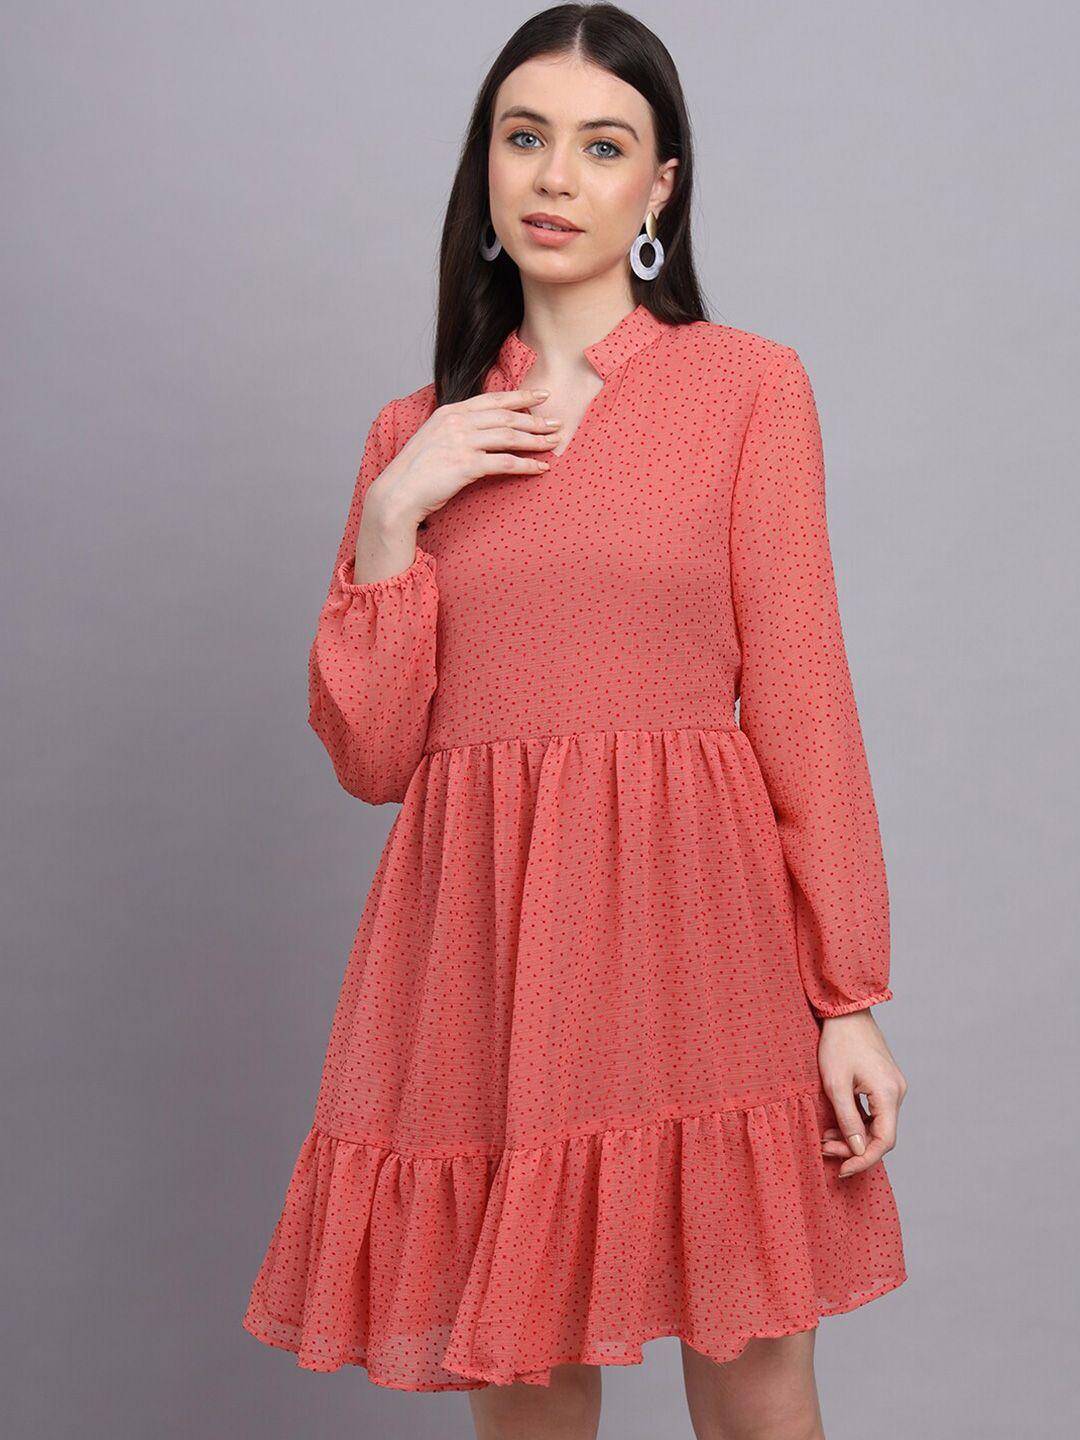 rediscover-fashion-geometric-printed-puff-sleeves-gathered-fit-&-flare-dress